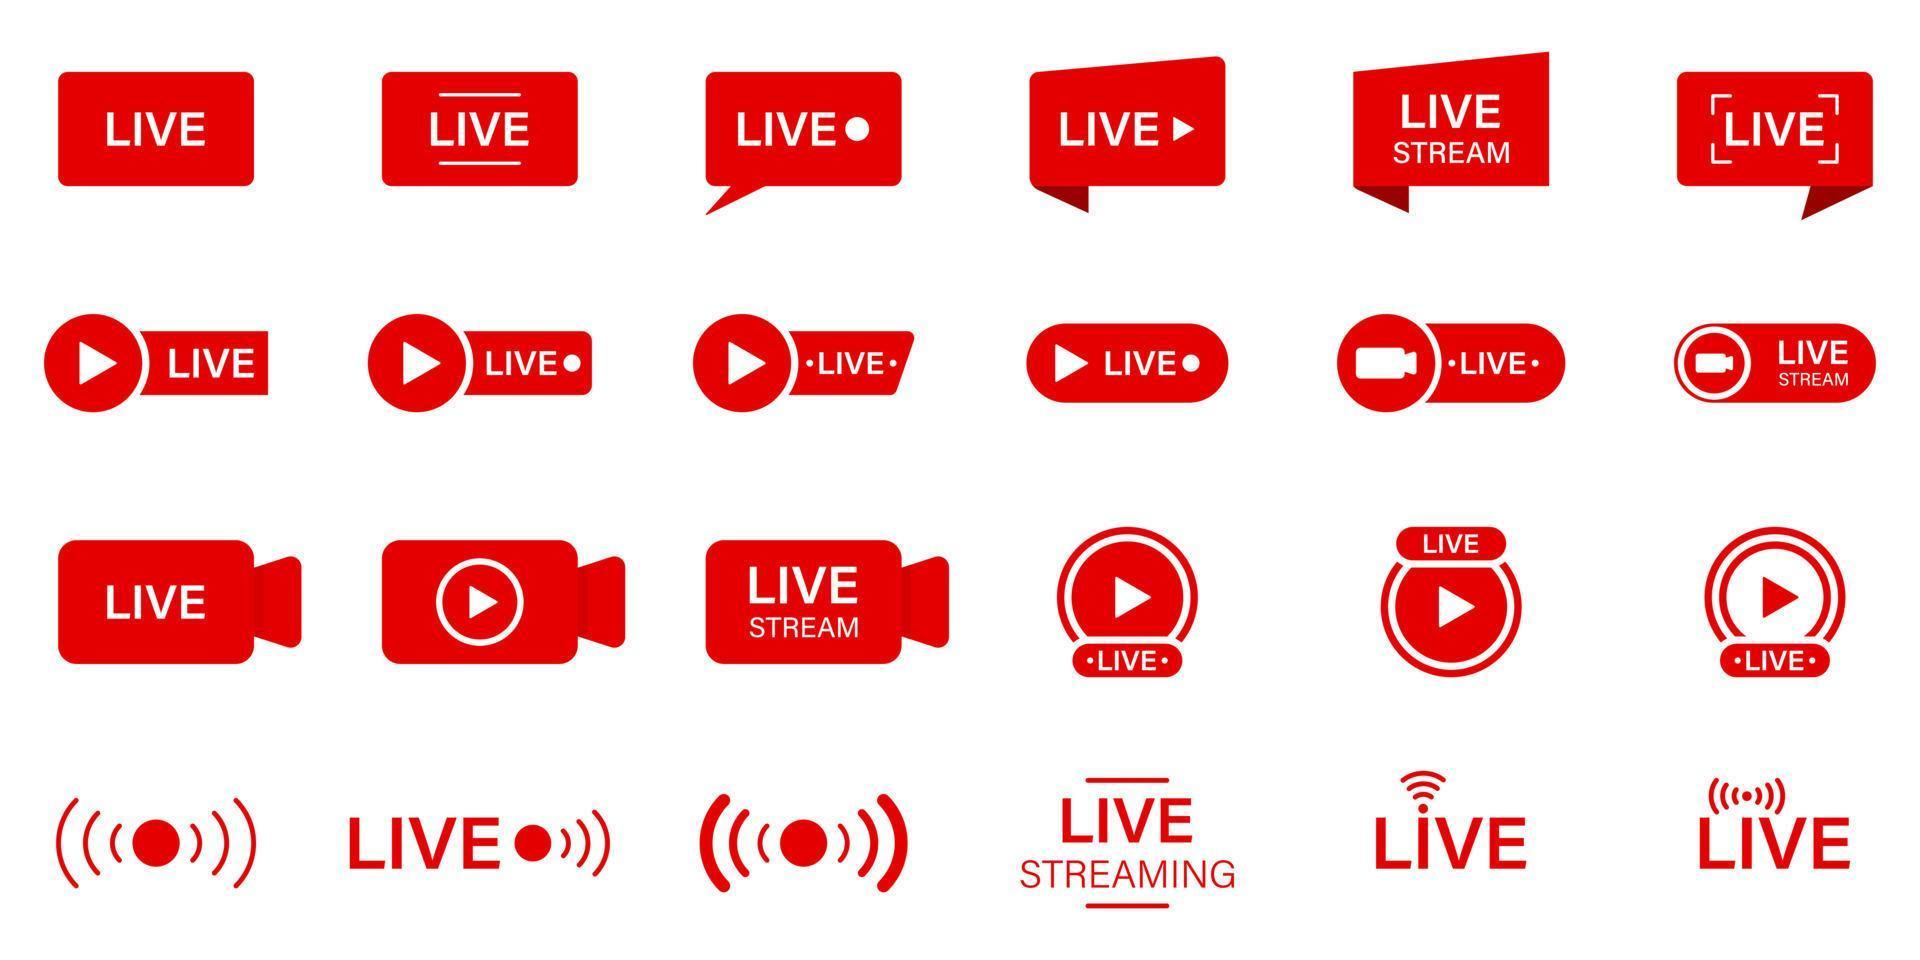 Live Stream Sign Set. Online News, Show, Channel Television. Live Stream Line Icon. Online Broadcast Buttons Pictogram. Red Symbol of Livestream. Isolated Vector Illustration.